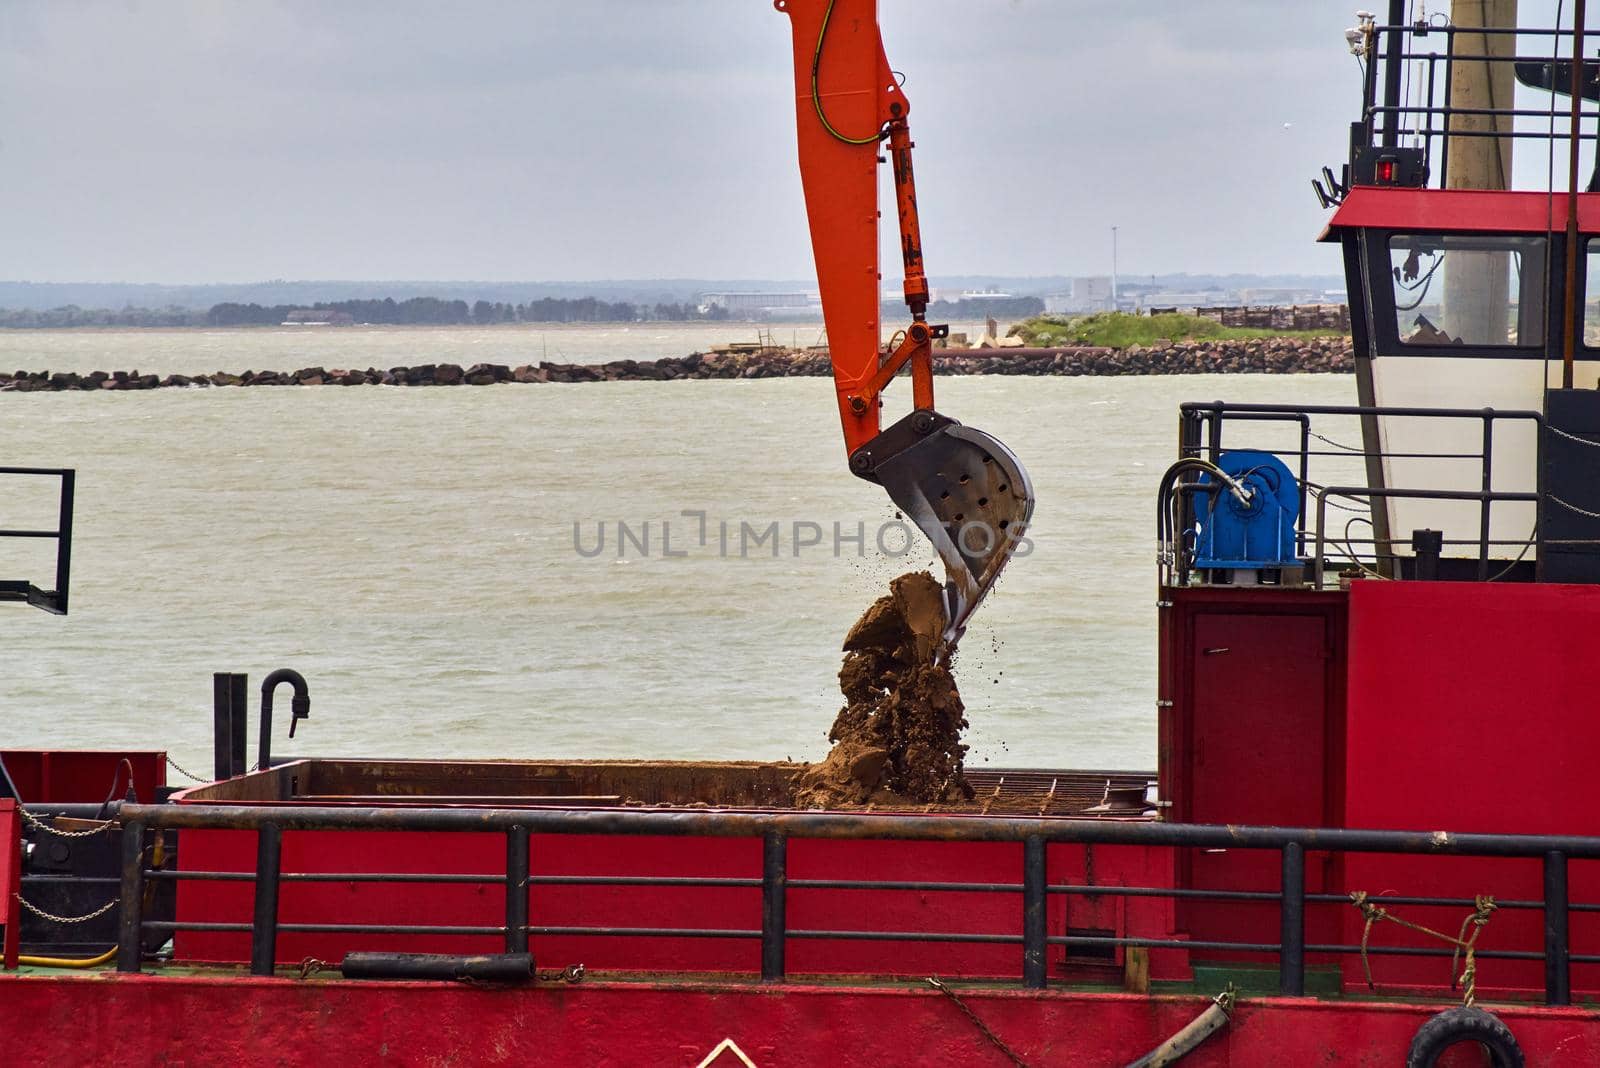 Mud and sand falls from the bucket of an excavator into a dredging ship